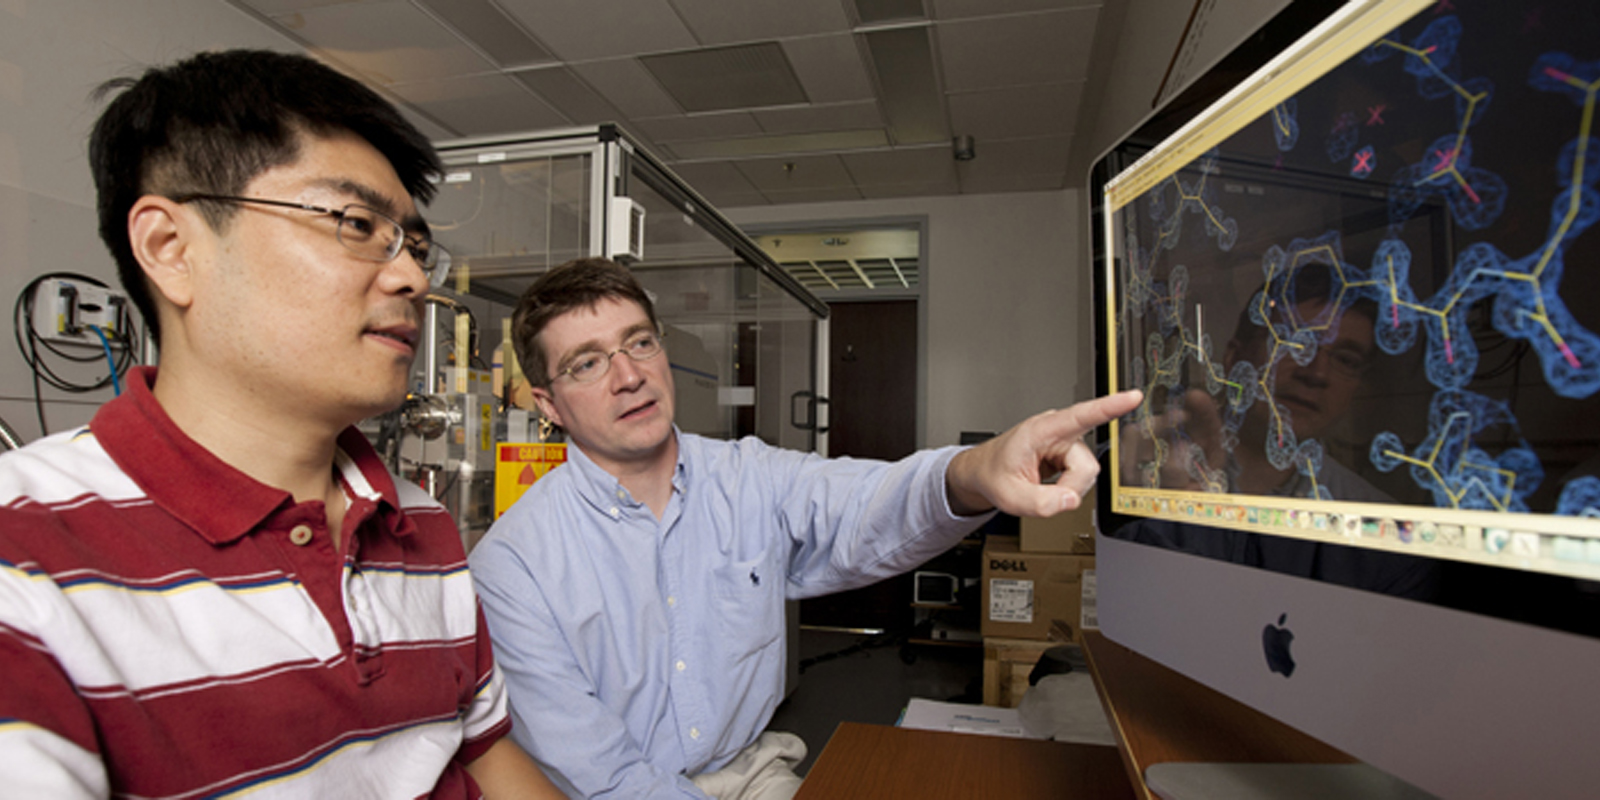 faculty looking at Molecular Mechanisms of Disease images on computer screen